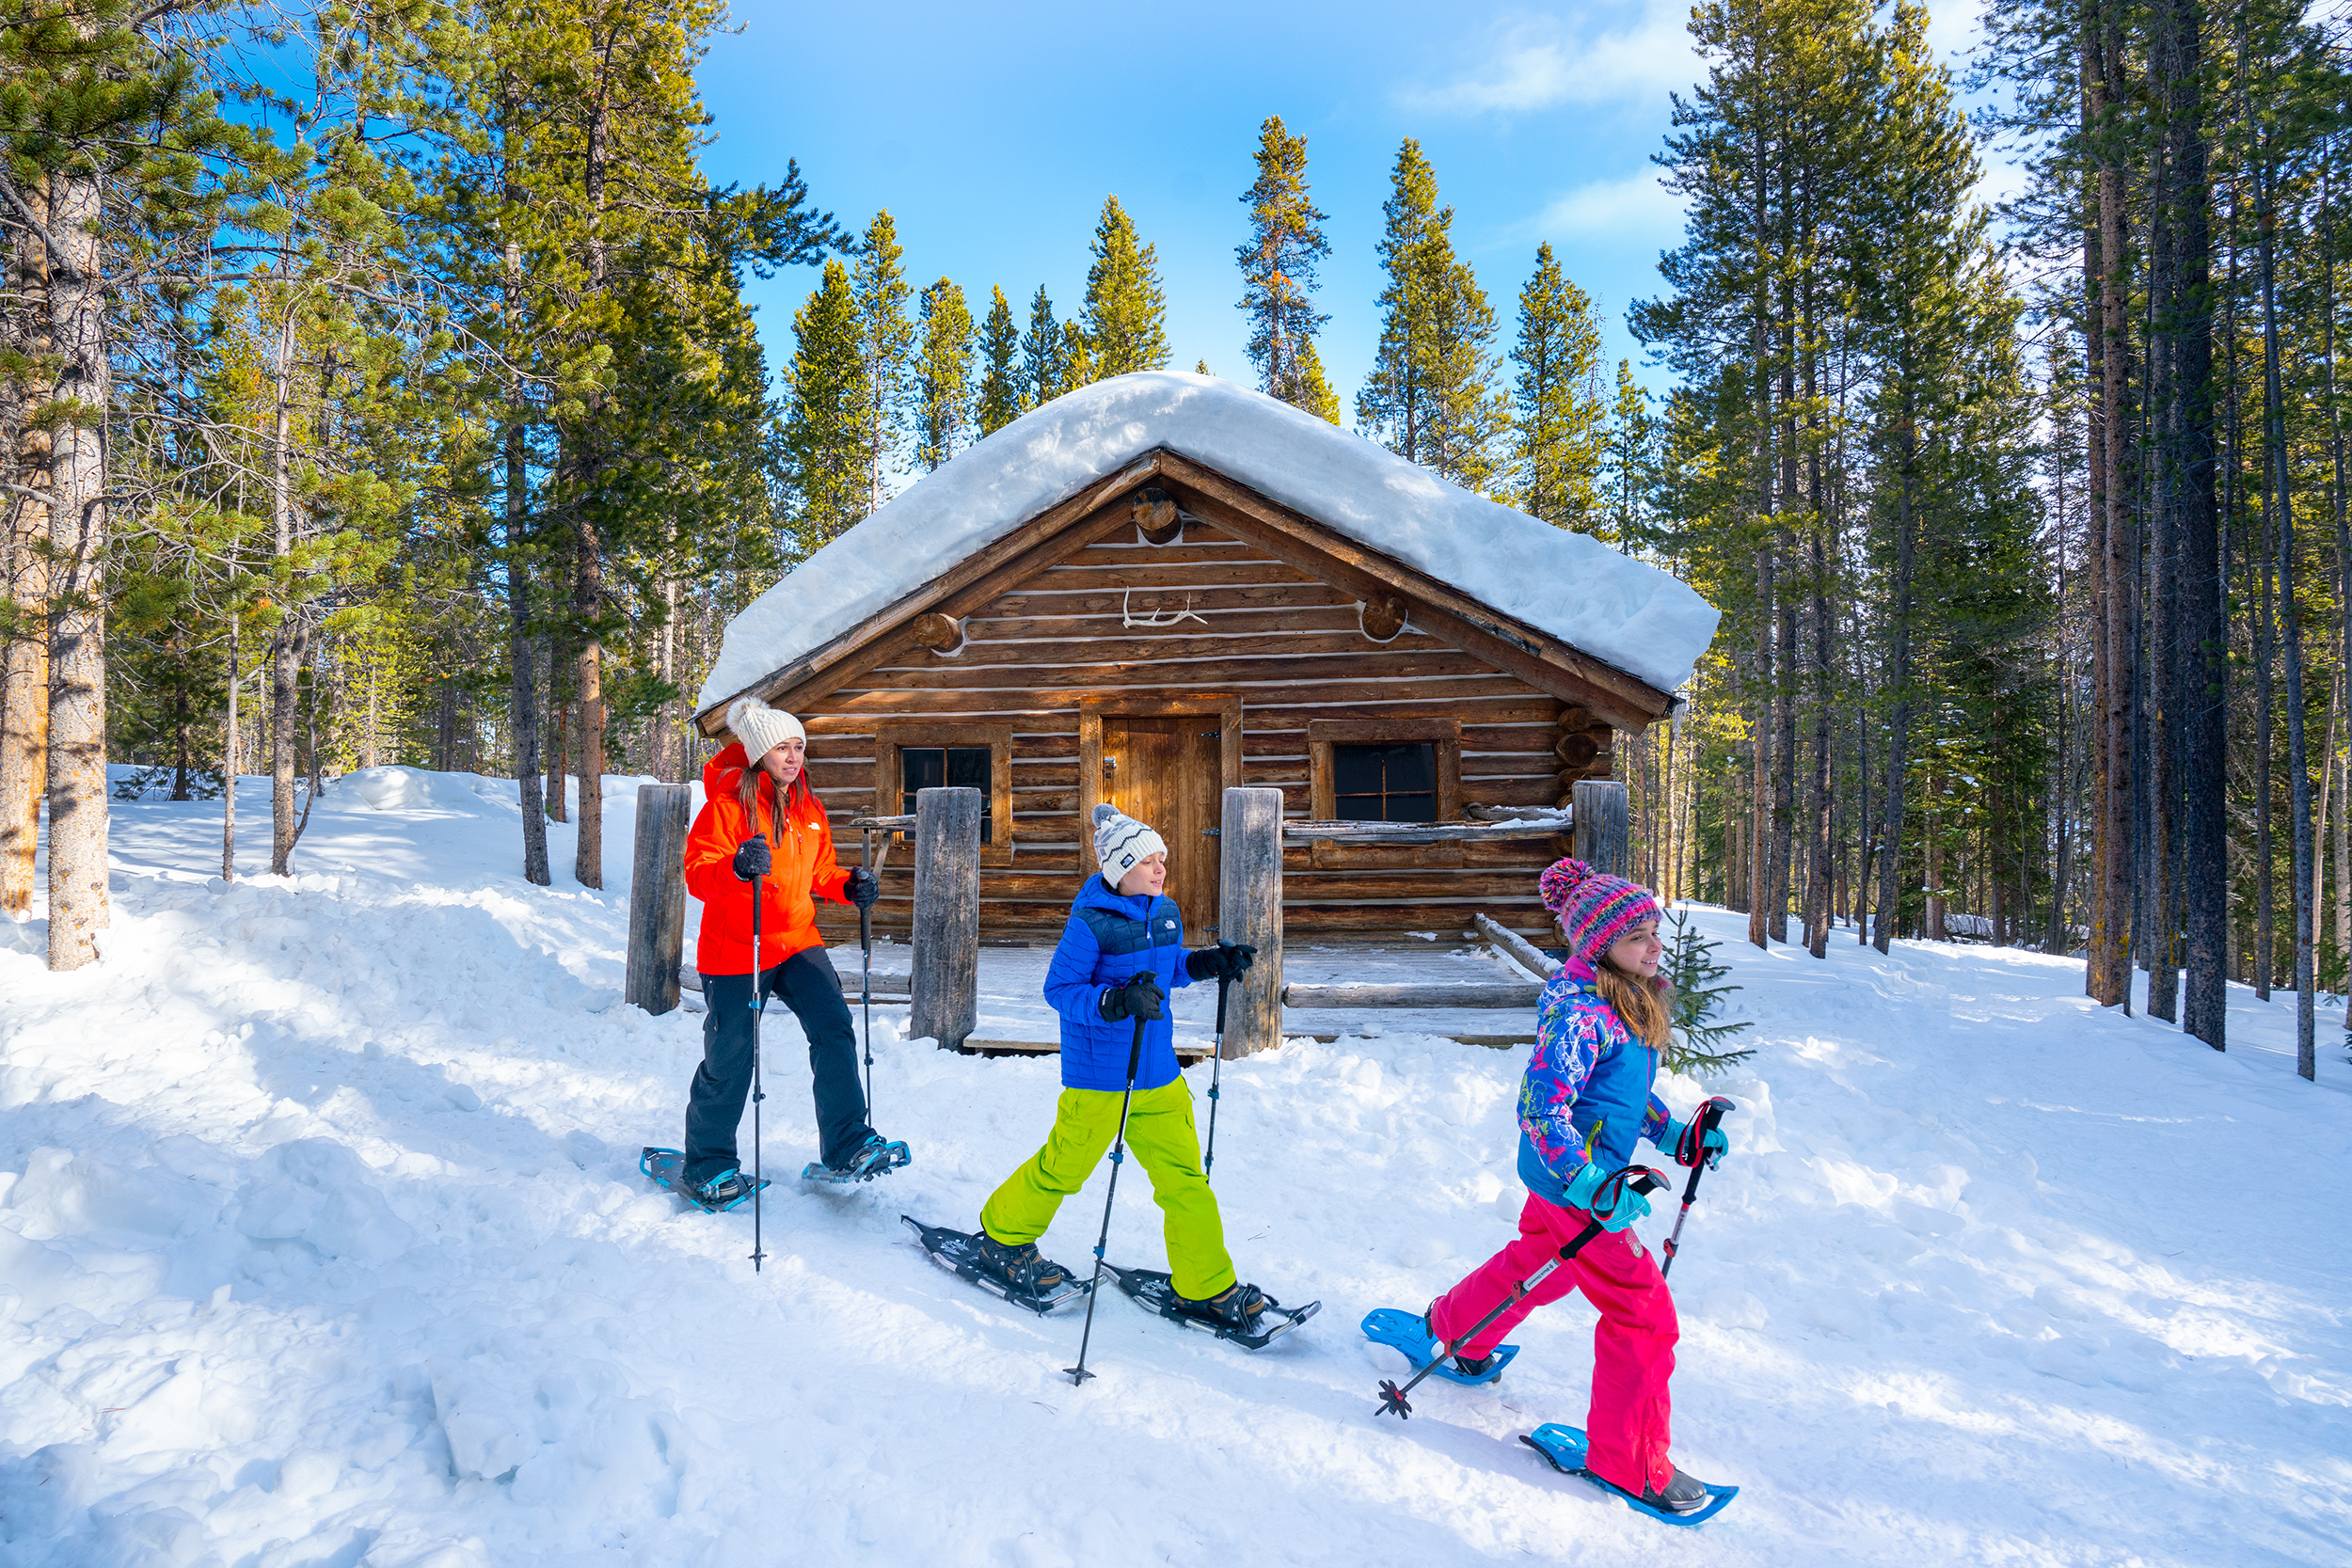 Family snowshoes past willies cabin at winter park resort